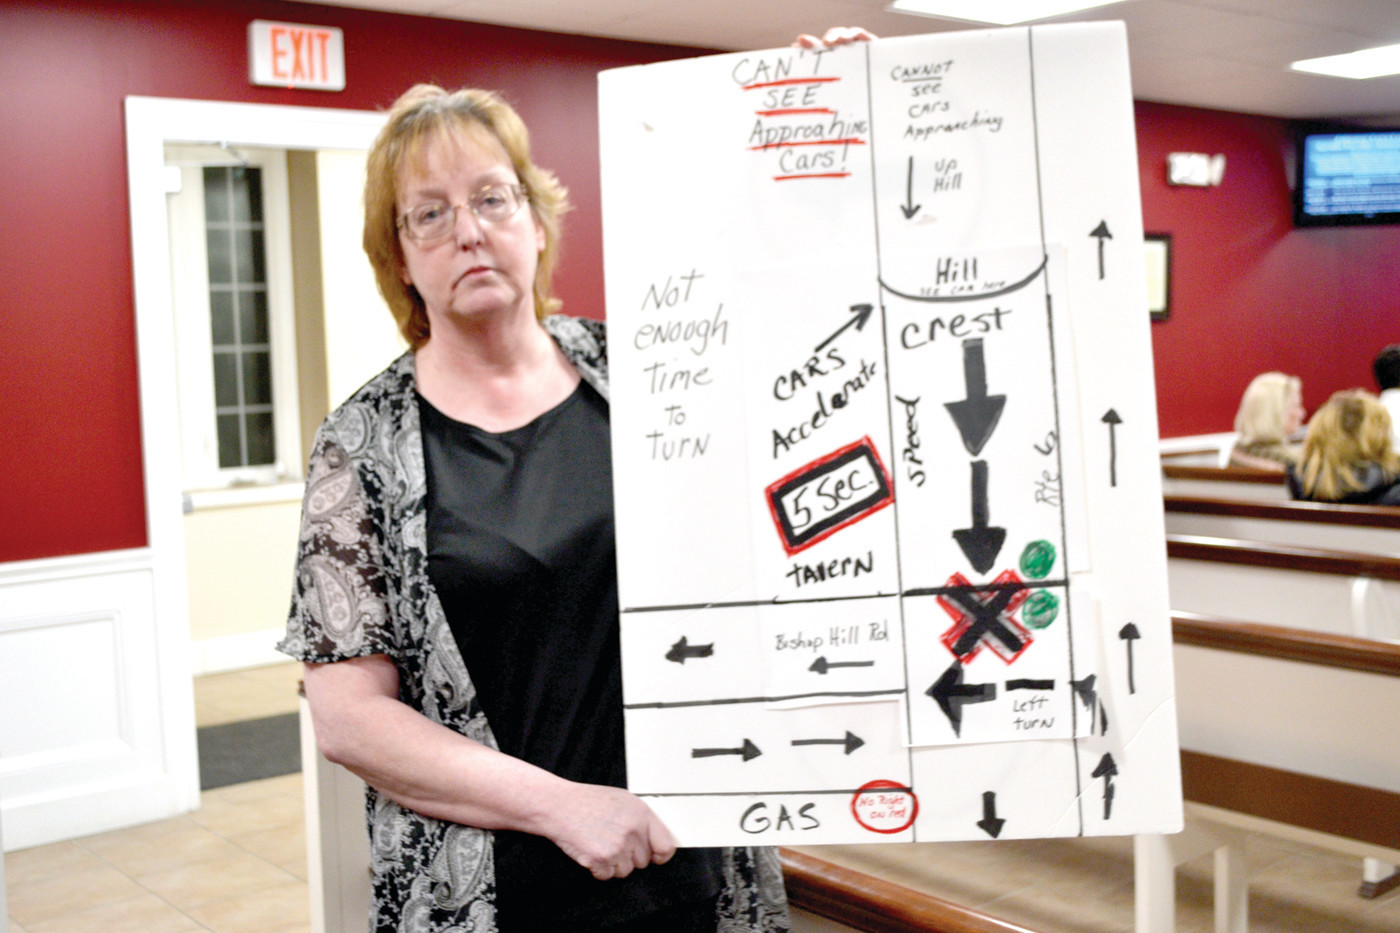 SAFETY CONCERN: After a fatal car crash at the intersection of Hartford Avenue and Bishop Hill Road in December, Johnston resident Barbara Carroll Quaranto has worked to change the traffic light pattern to prevent future accidents.